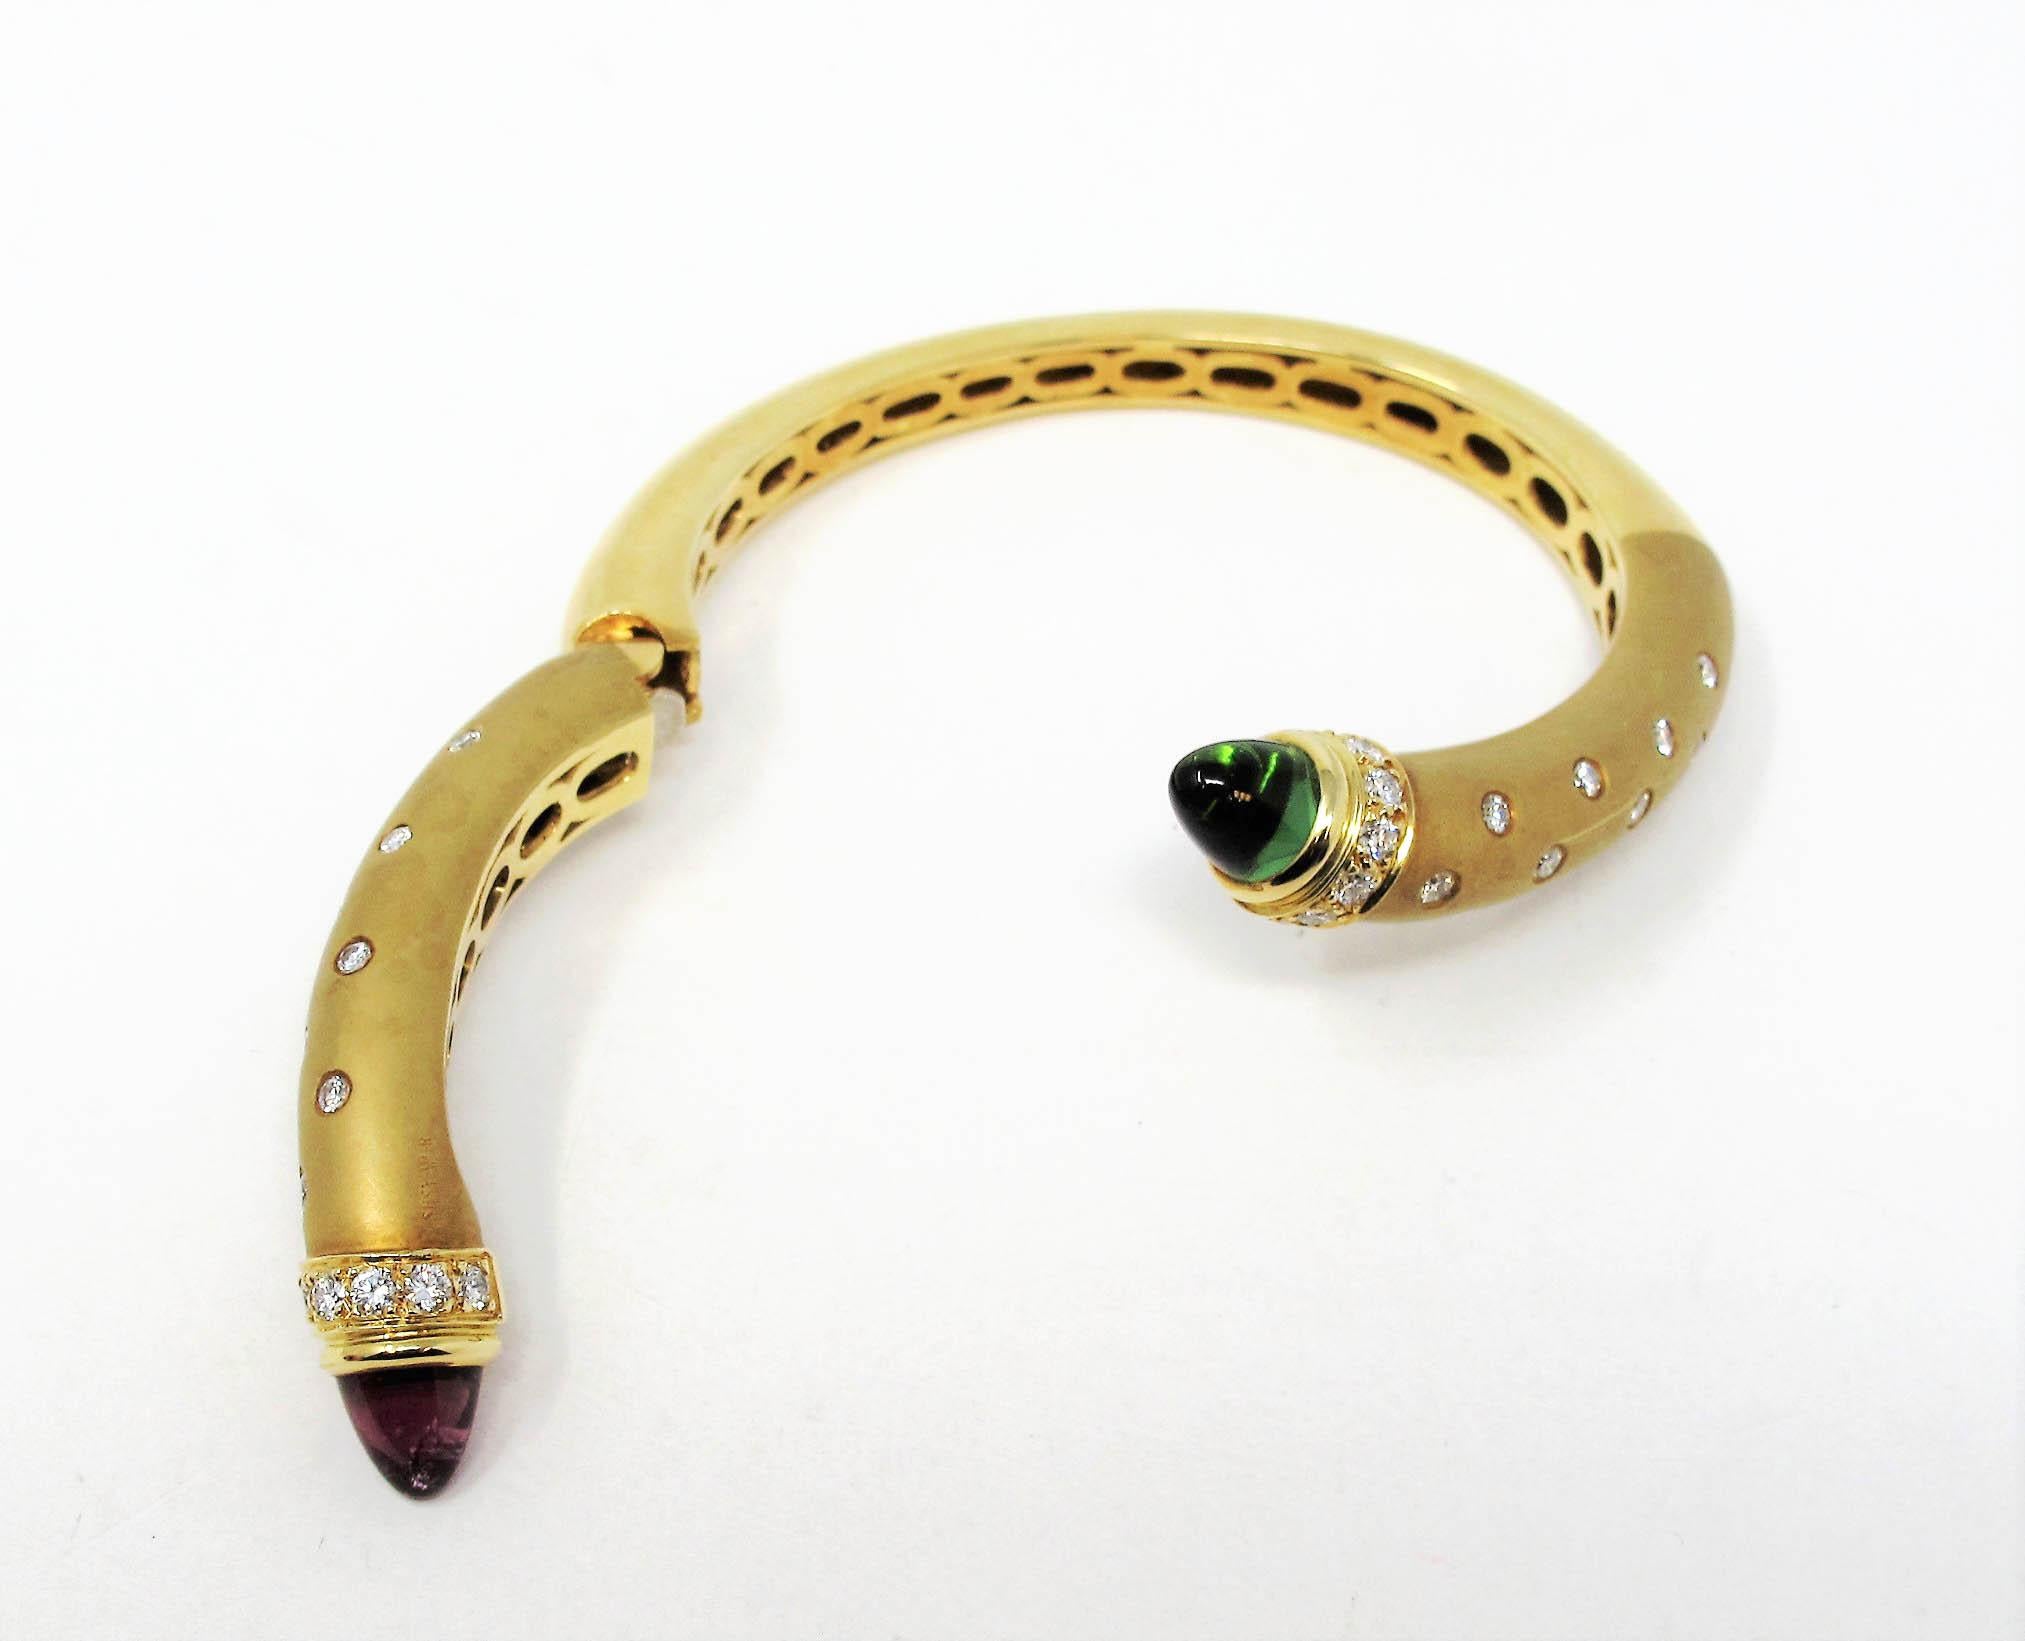 Cabochon Susy Mor Pink and Green Tourmaline and Diamond Bypass Bangle Bracelet 18K Gold For Sale